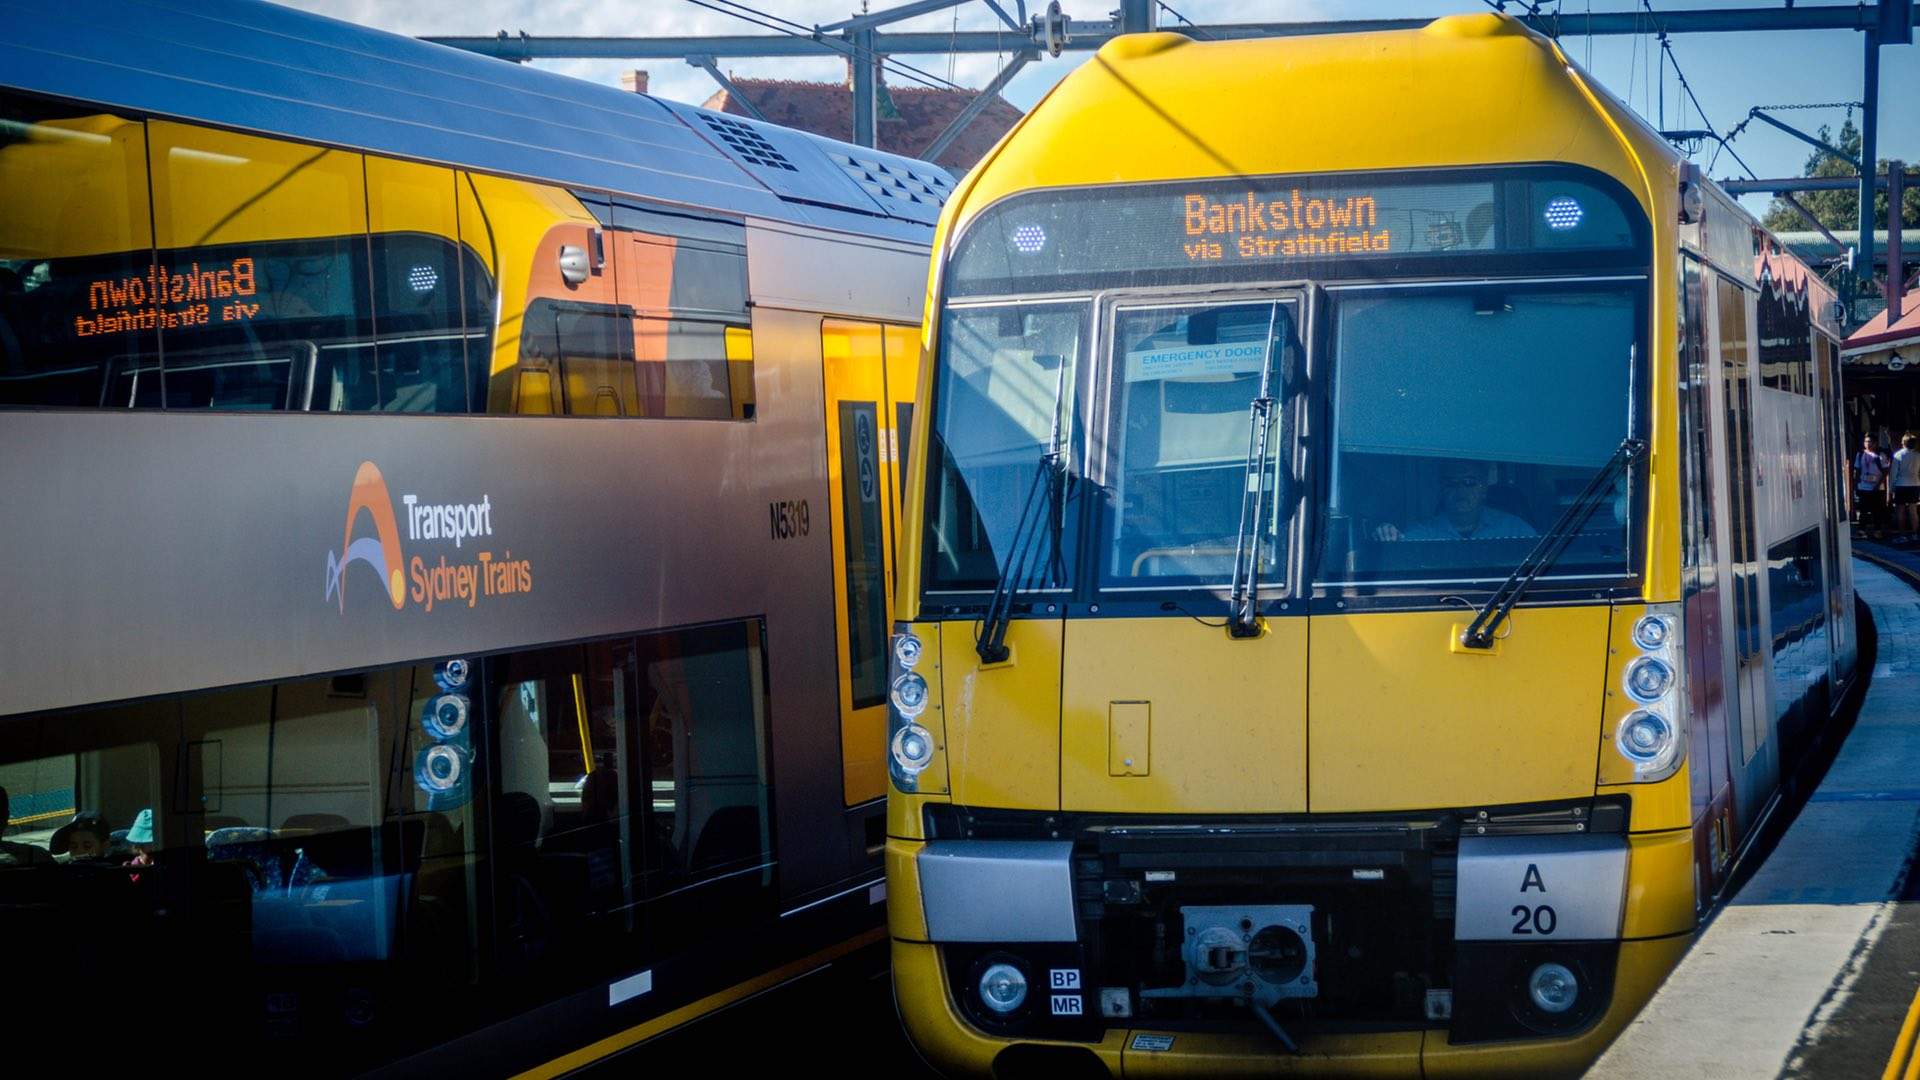 A Derailment Is Causing Major Delays Across Sydney's Train Network This Morning